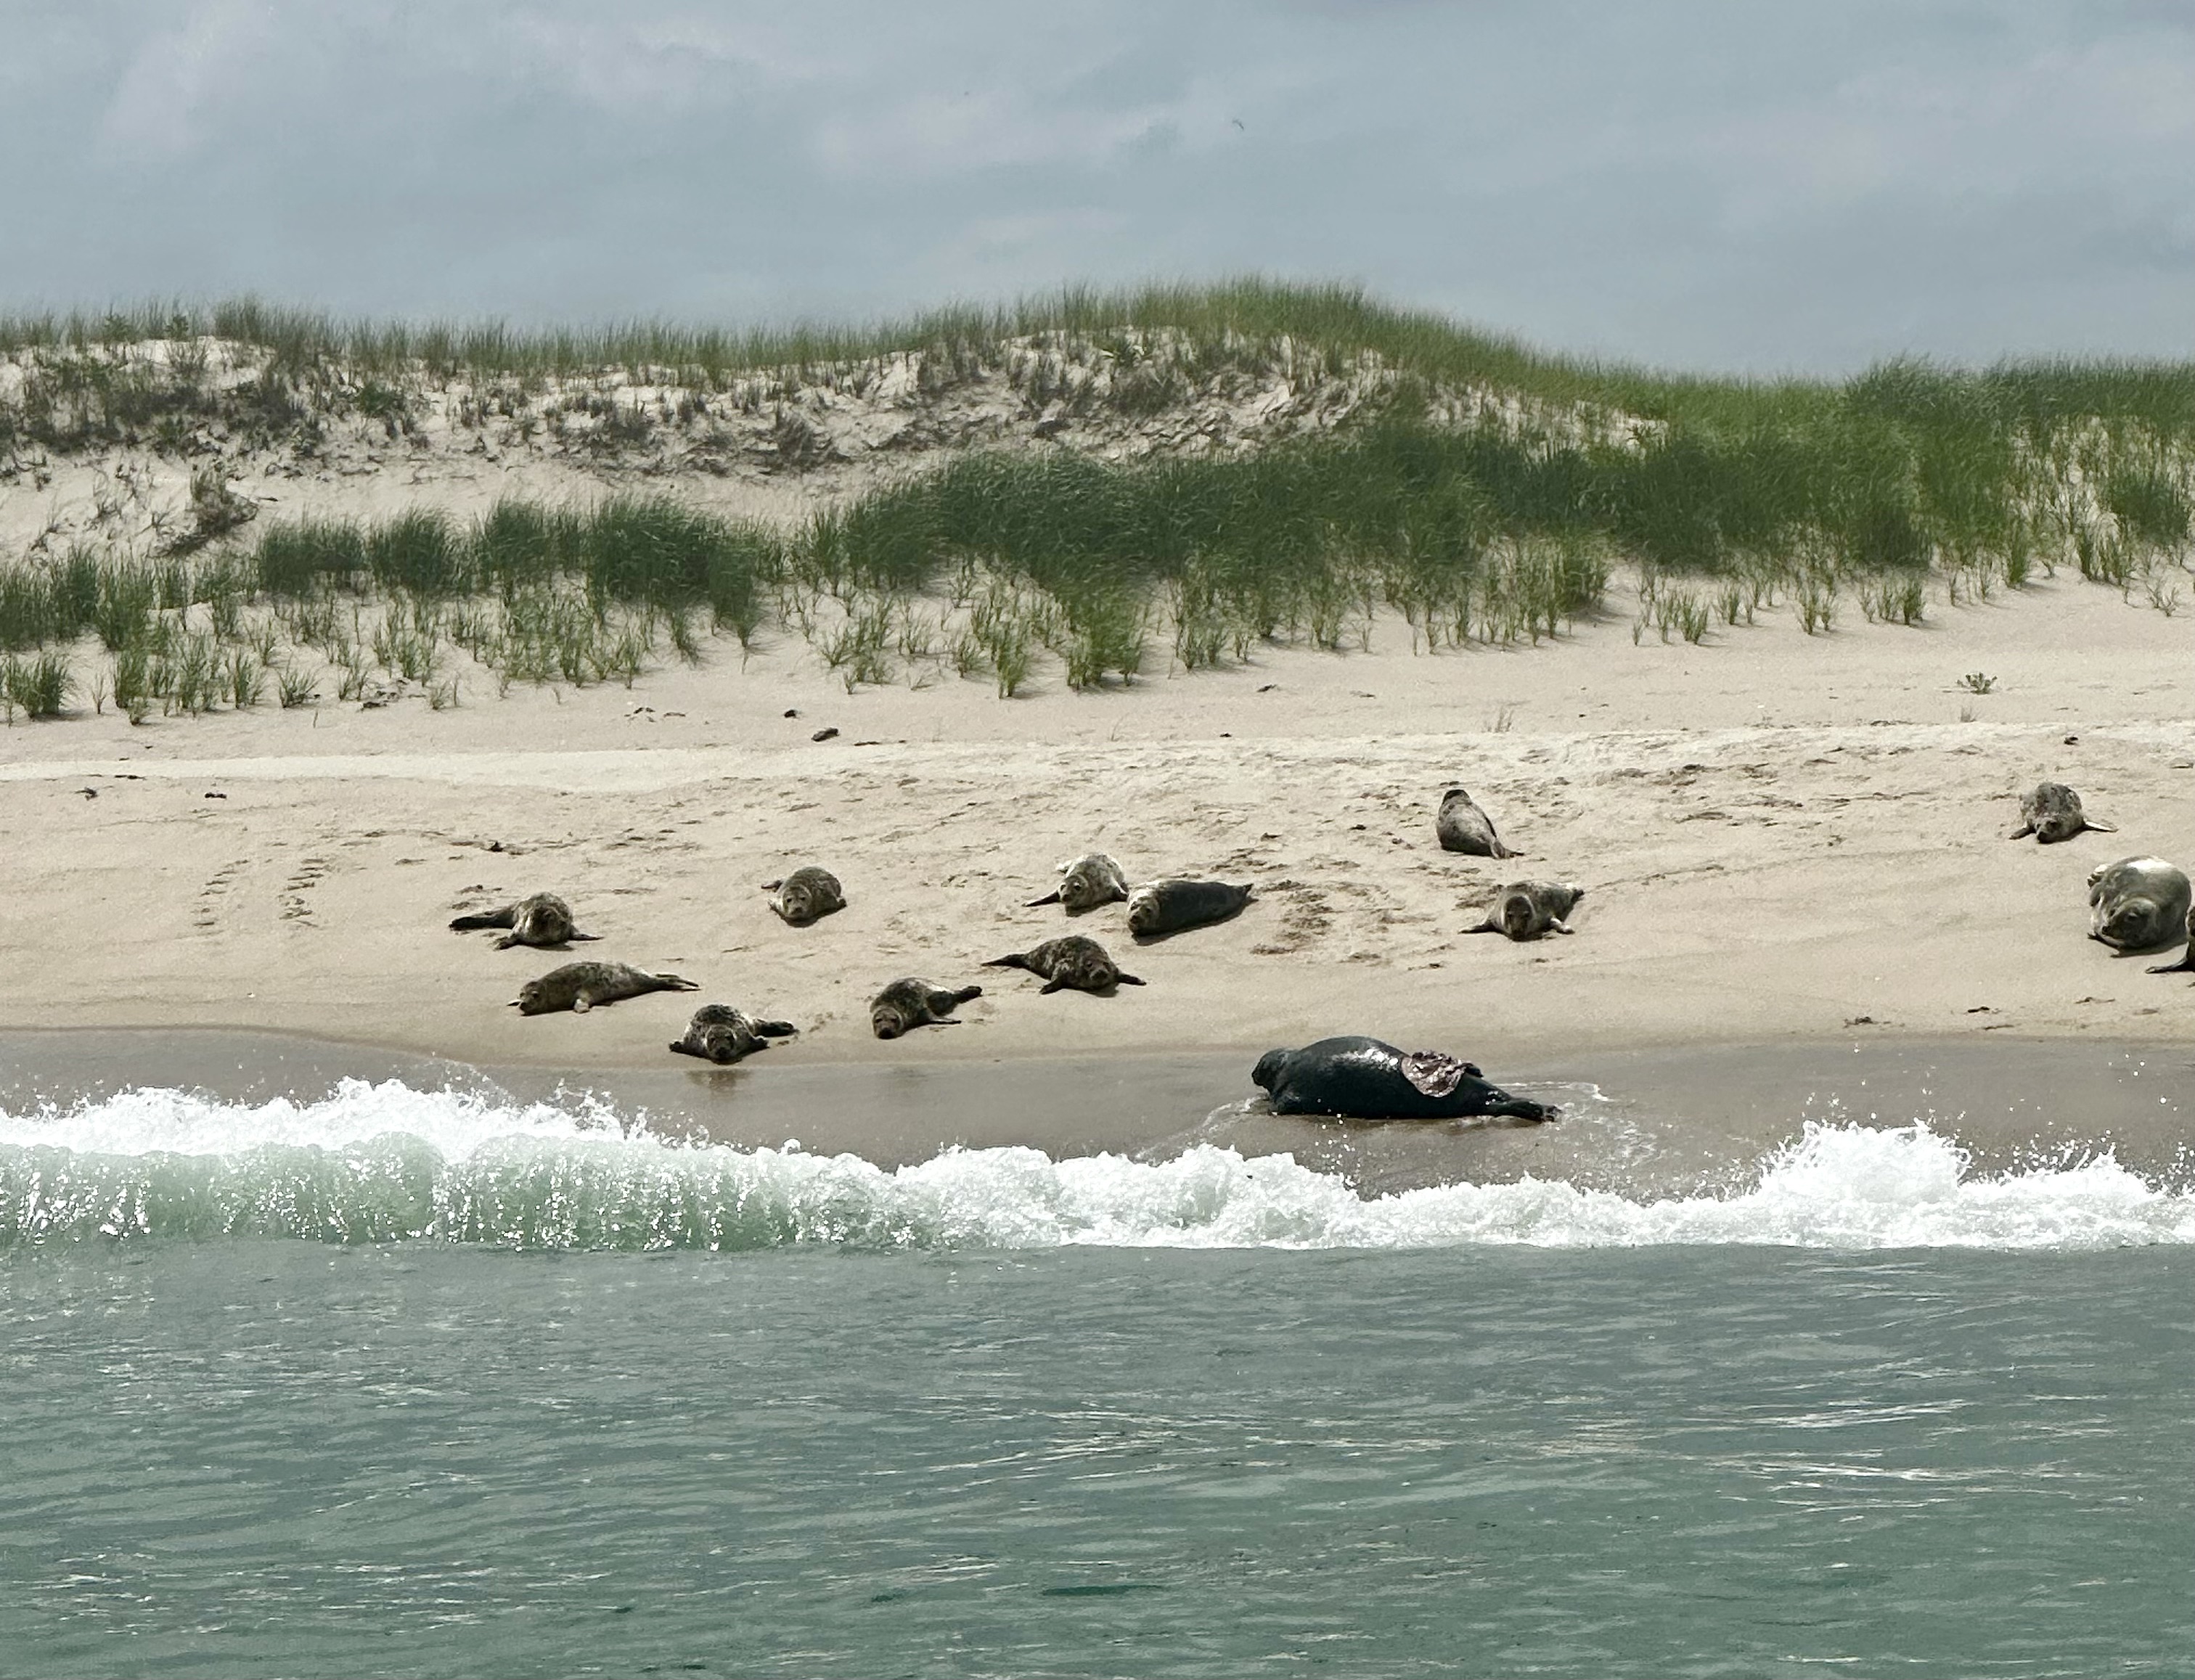 Conservation efforts have saved seals, but at what cost to Cape